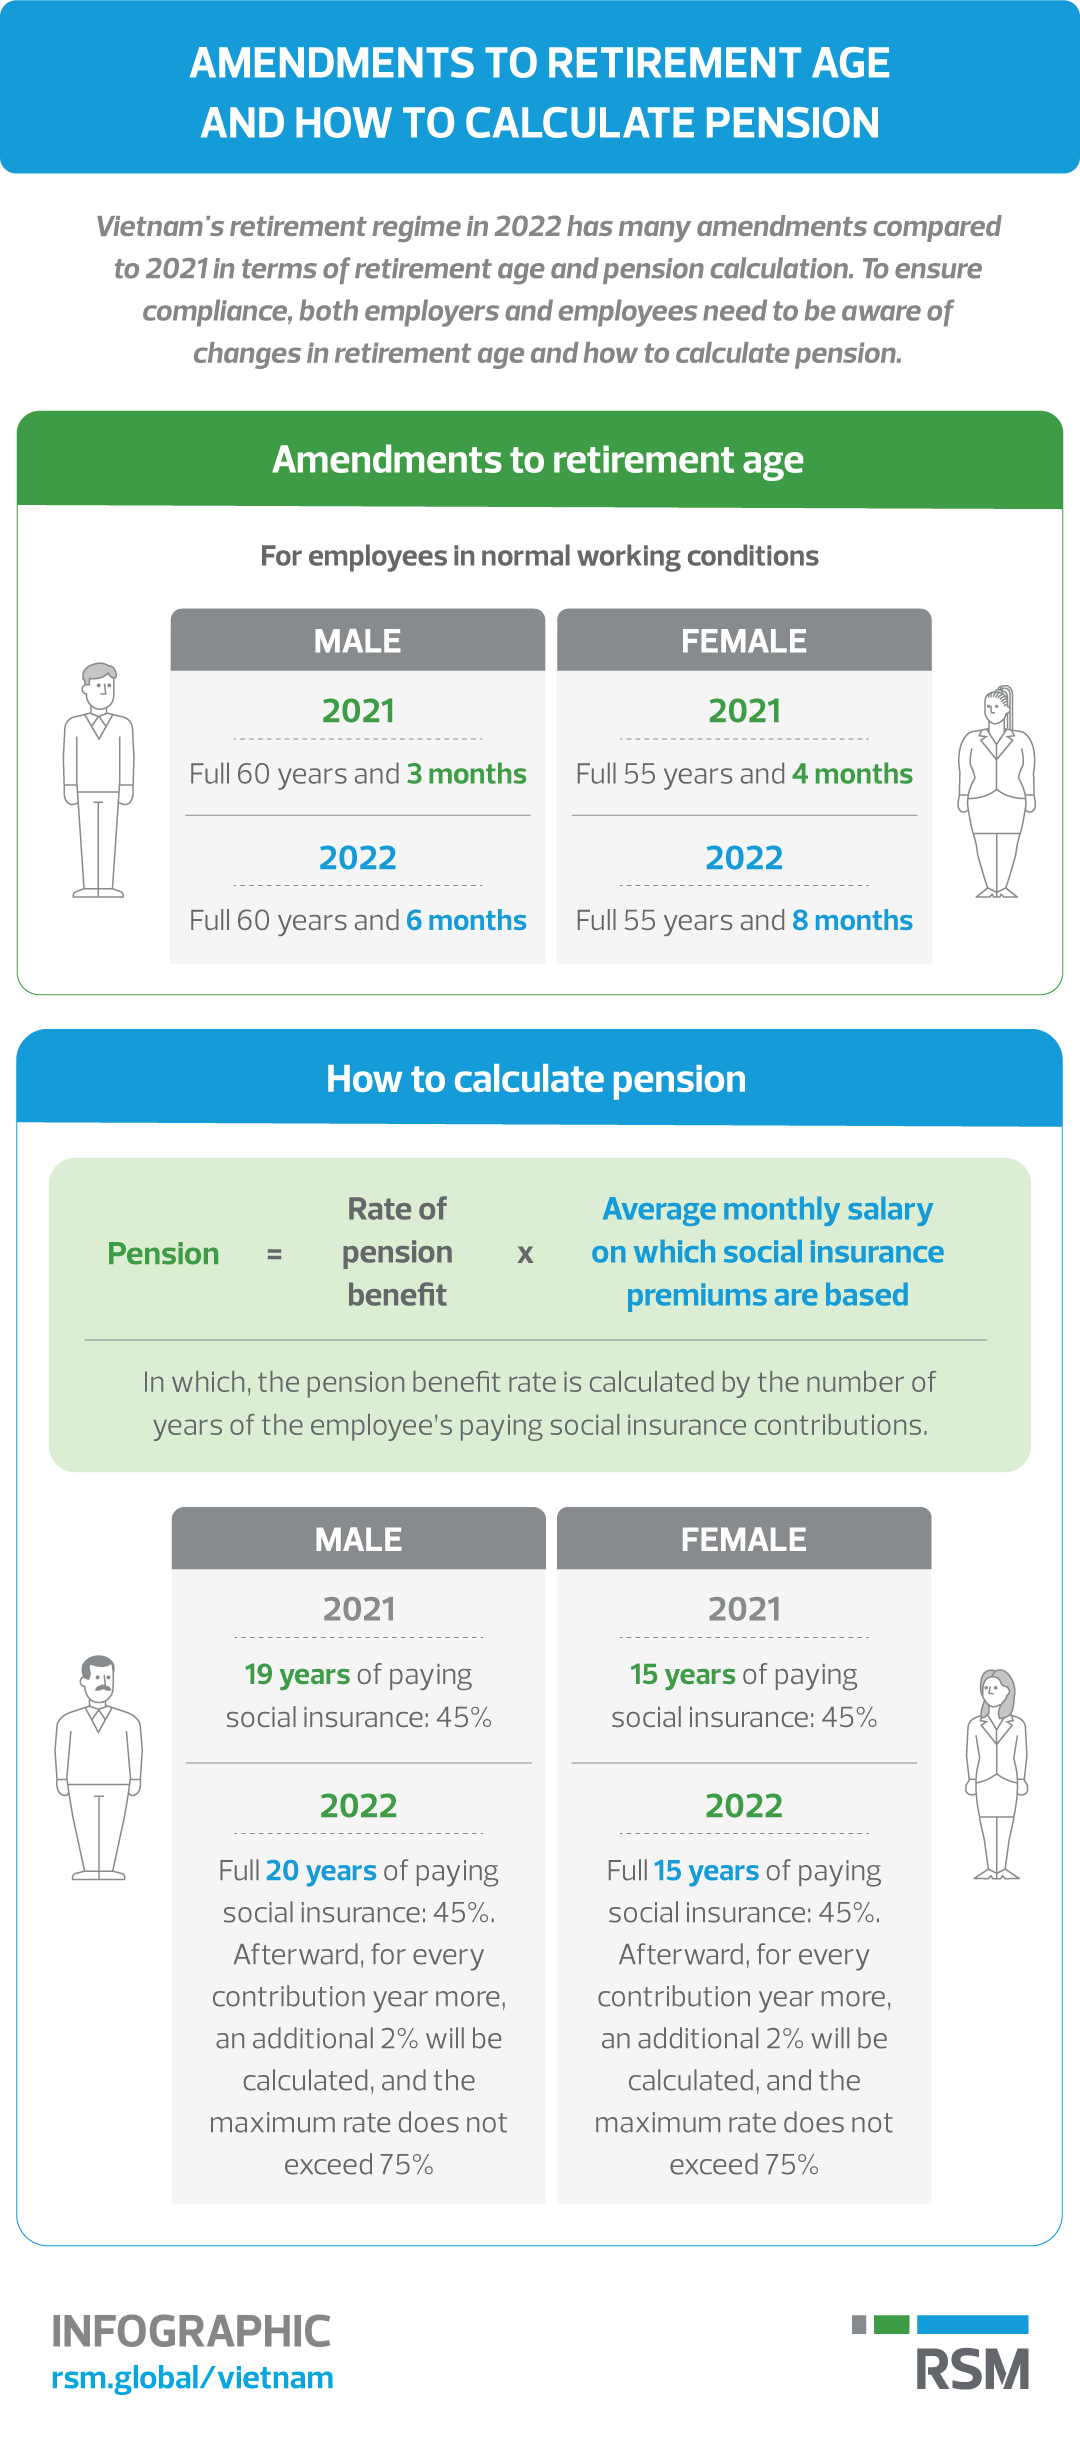 Do You Really Need to Save 10X Salary for Retirement? Not if You Have a  Pension